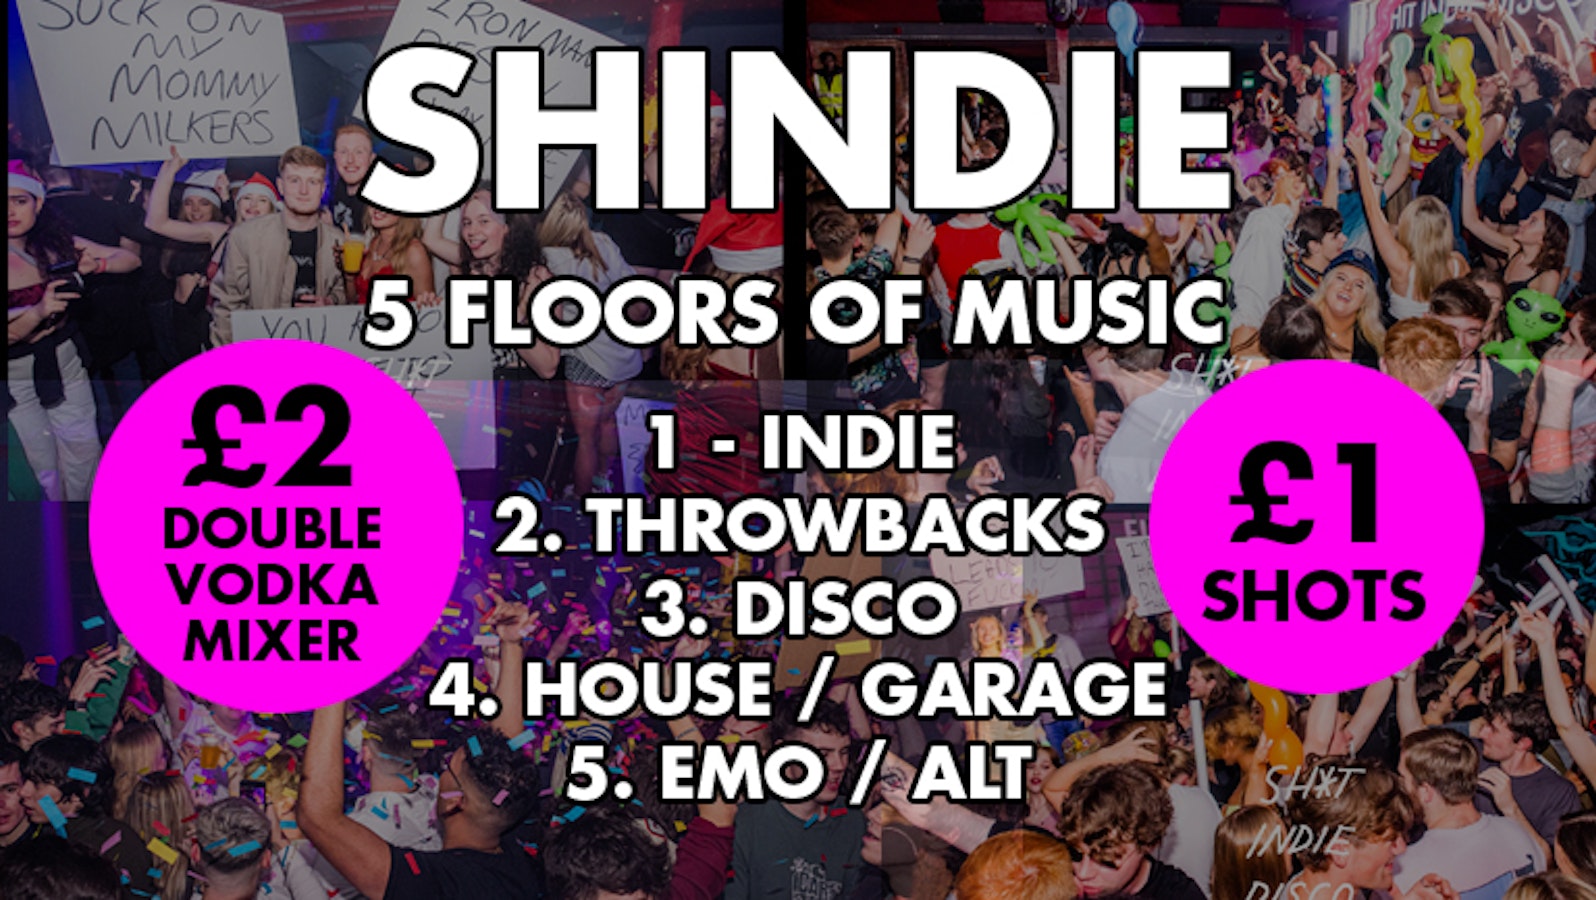 SHINDIE – Foo Fighters VS The Killers Special – Plus ABBA special in the loft! TOP FLOOR = TRICK DANCE SPECIAL🚨 £2 dbl vodka mixers 🚨 5 floors of Music – Indie / Throwback chart/ Dance/ Club Bangers /Taylor Swift / Emo